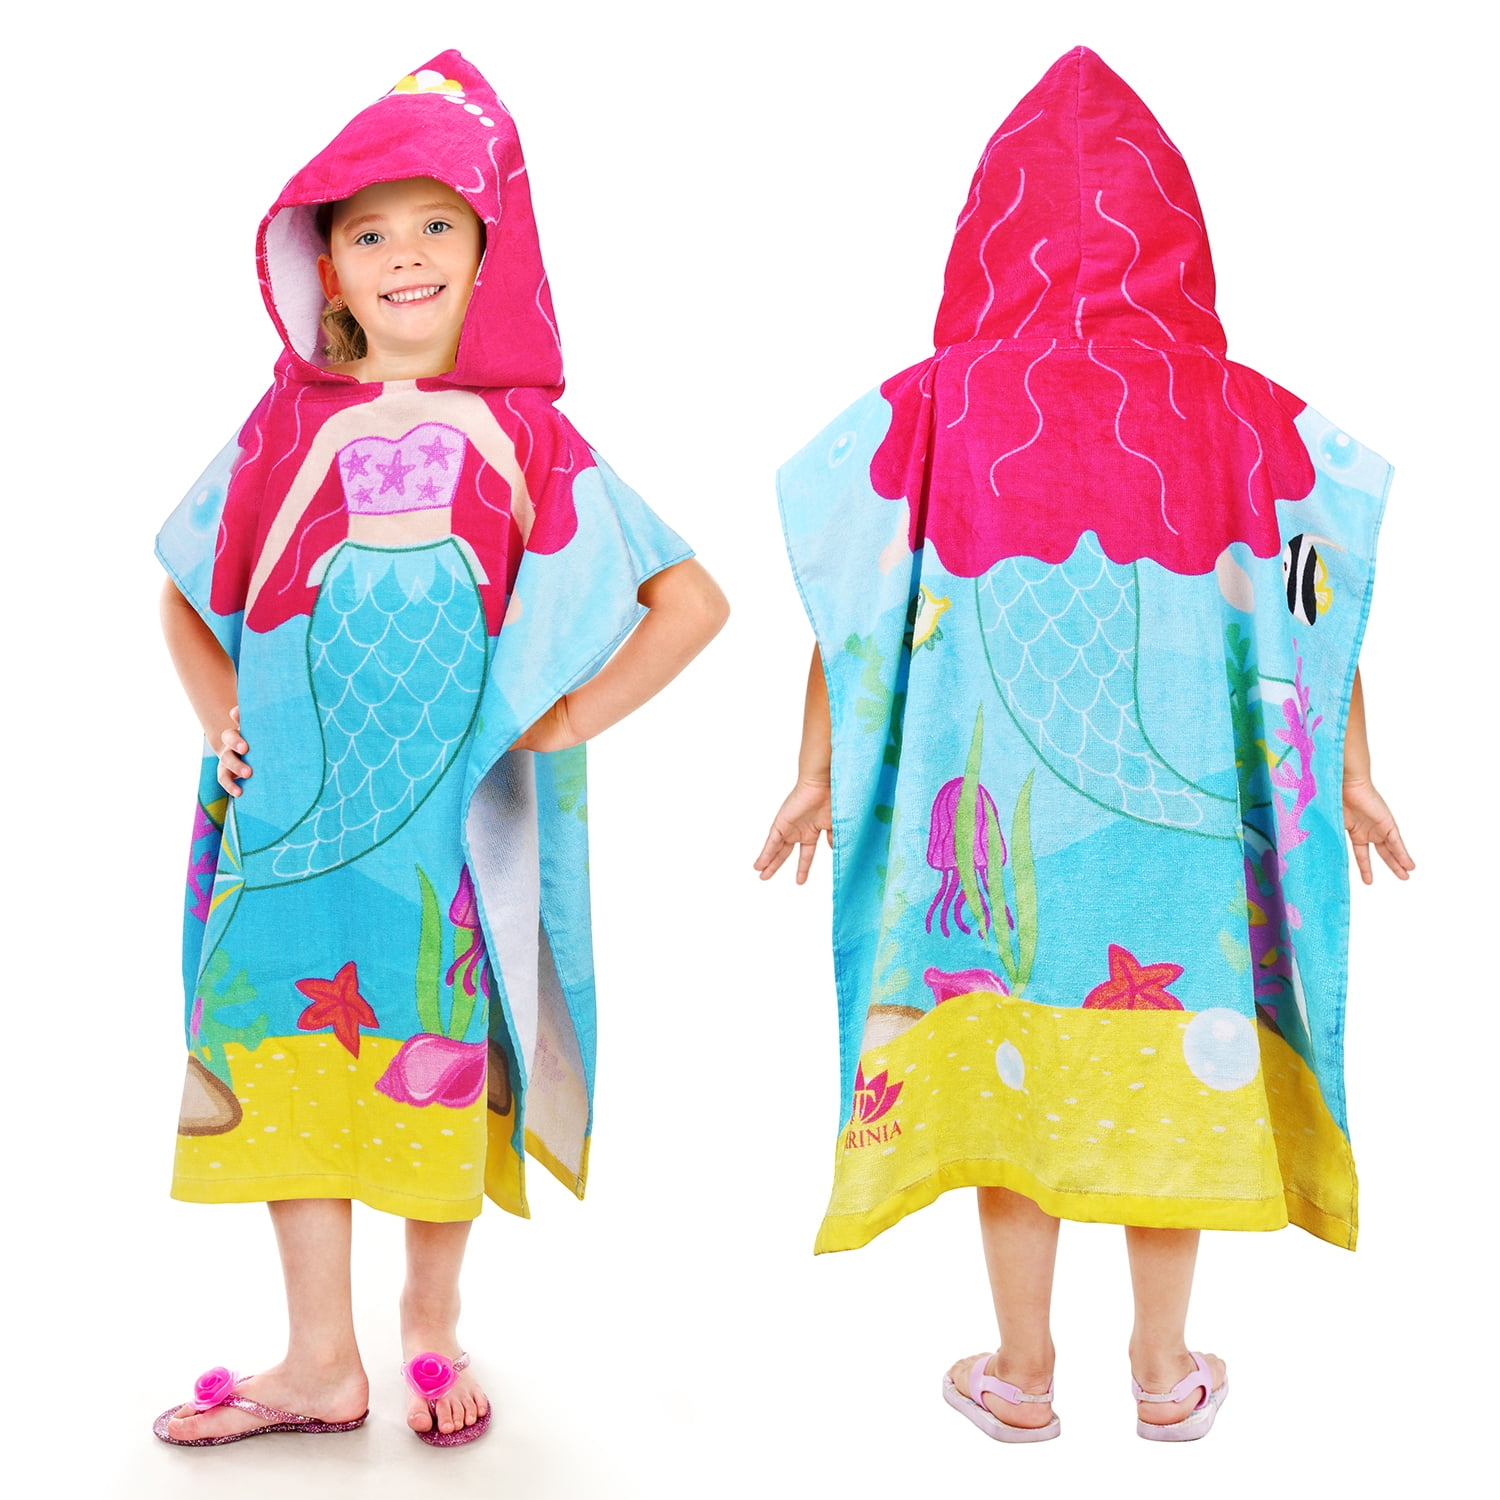 Poncho Style 100% Cotton Soft & Pretty Hooded Unicorn Bath Towel for Kids to 5T 